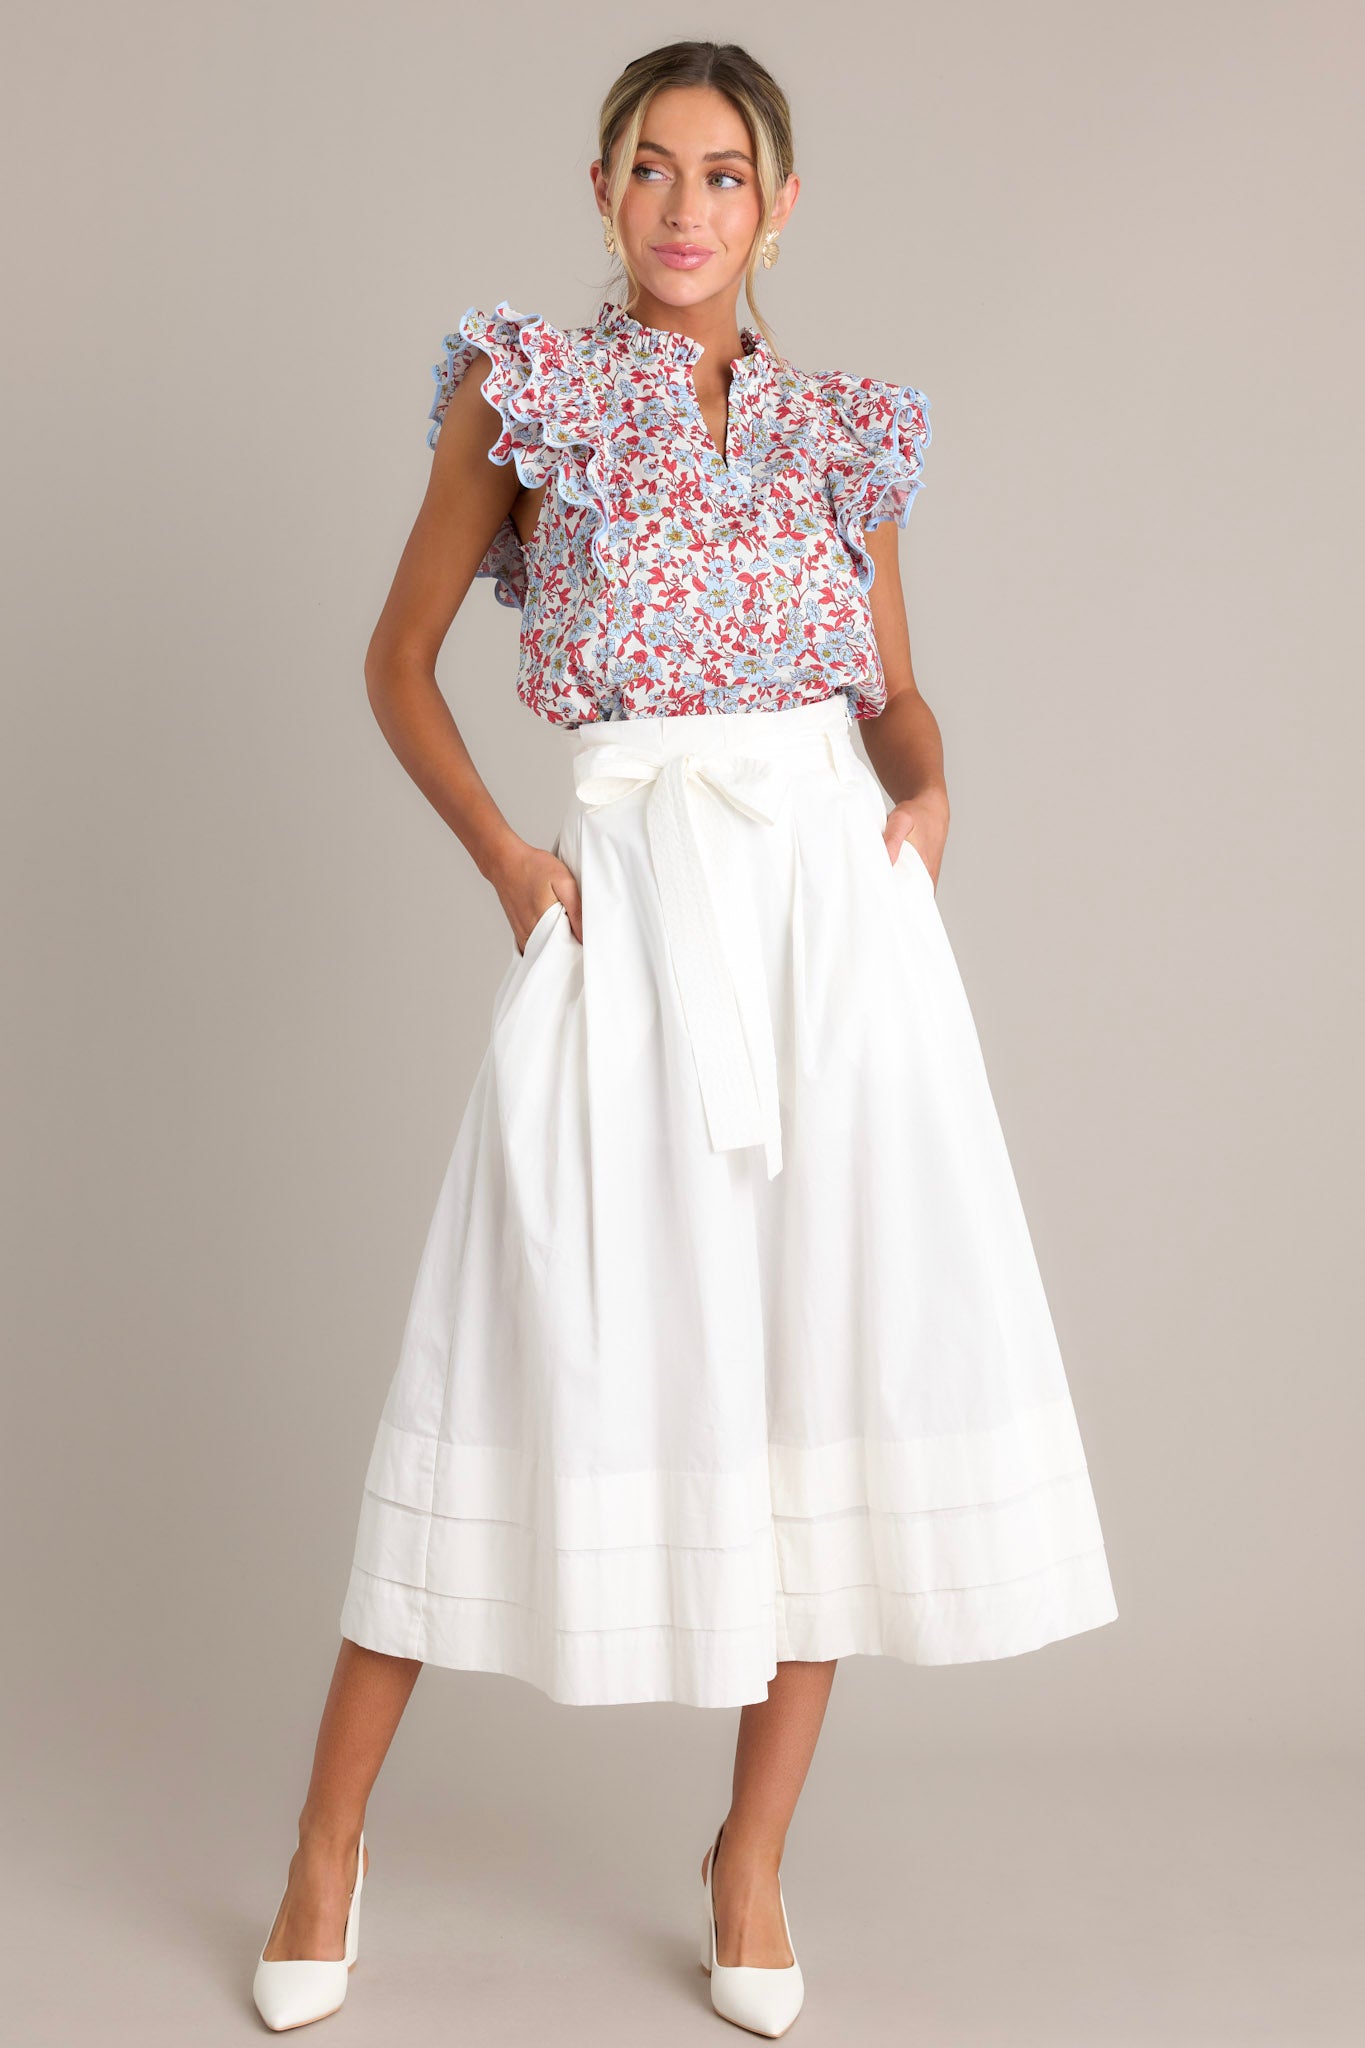 Full length view of a red top featuring a ruffled v-neckline, a red & light blue floral print, and ruffled short sleeves with ricrac detailing.